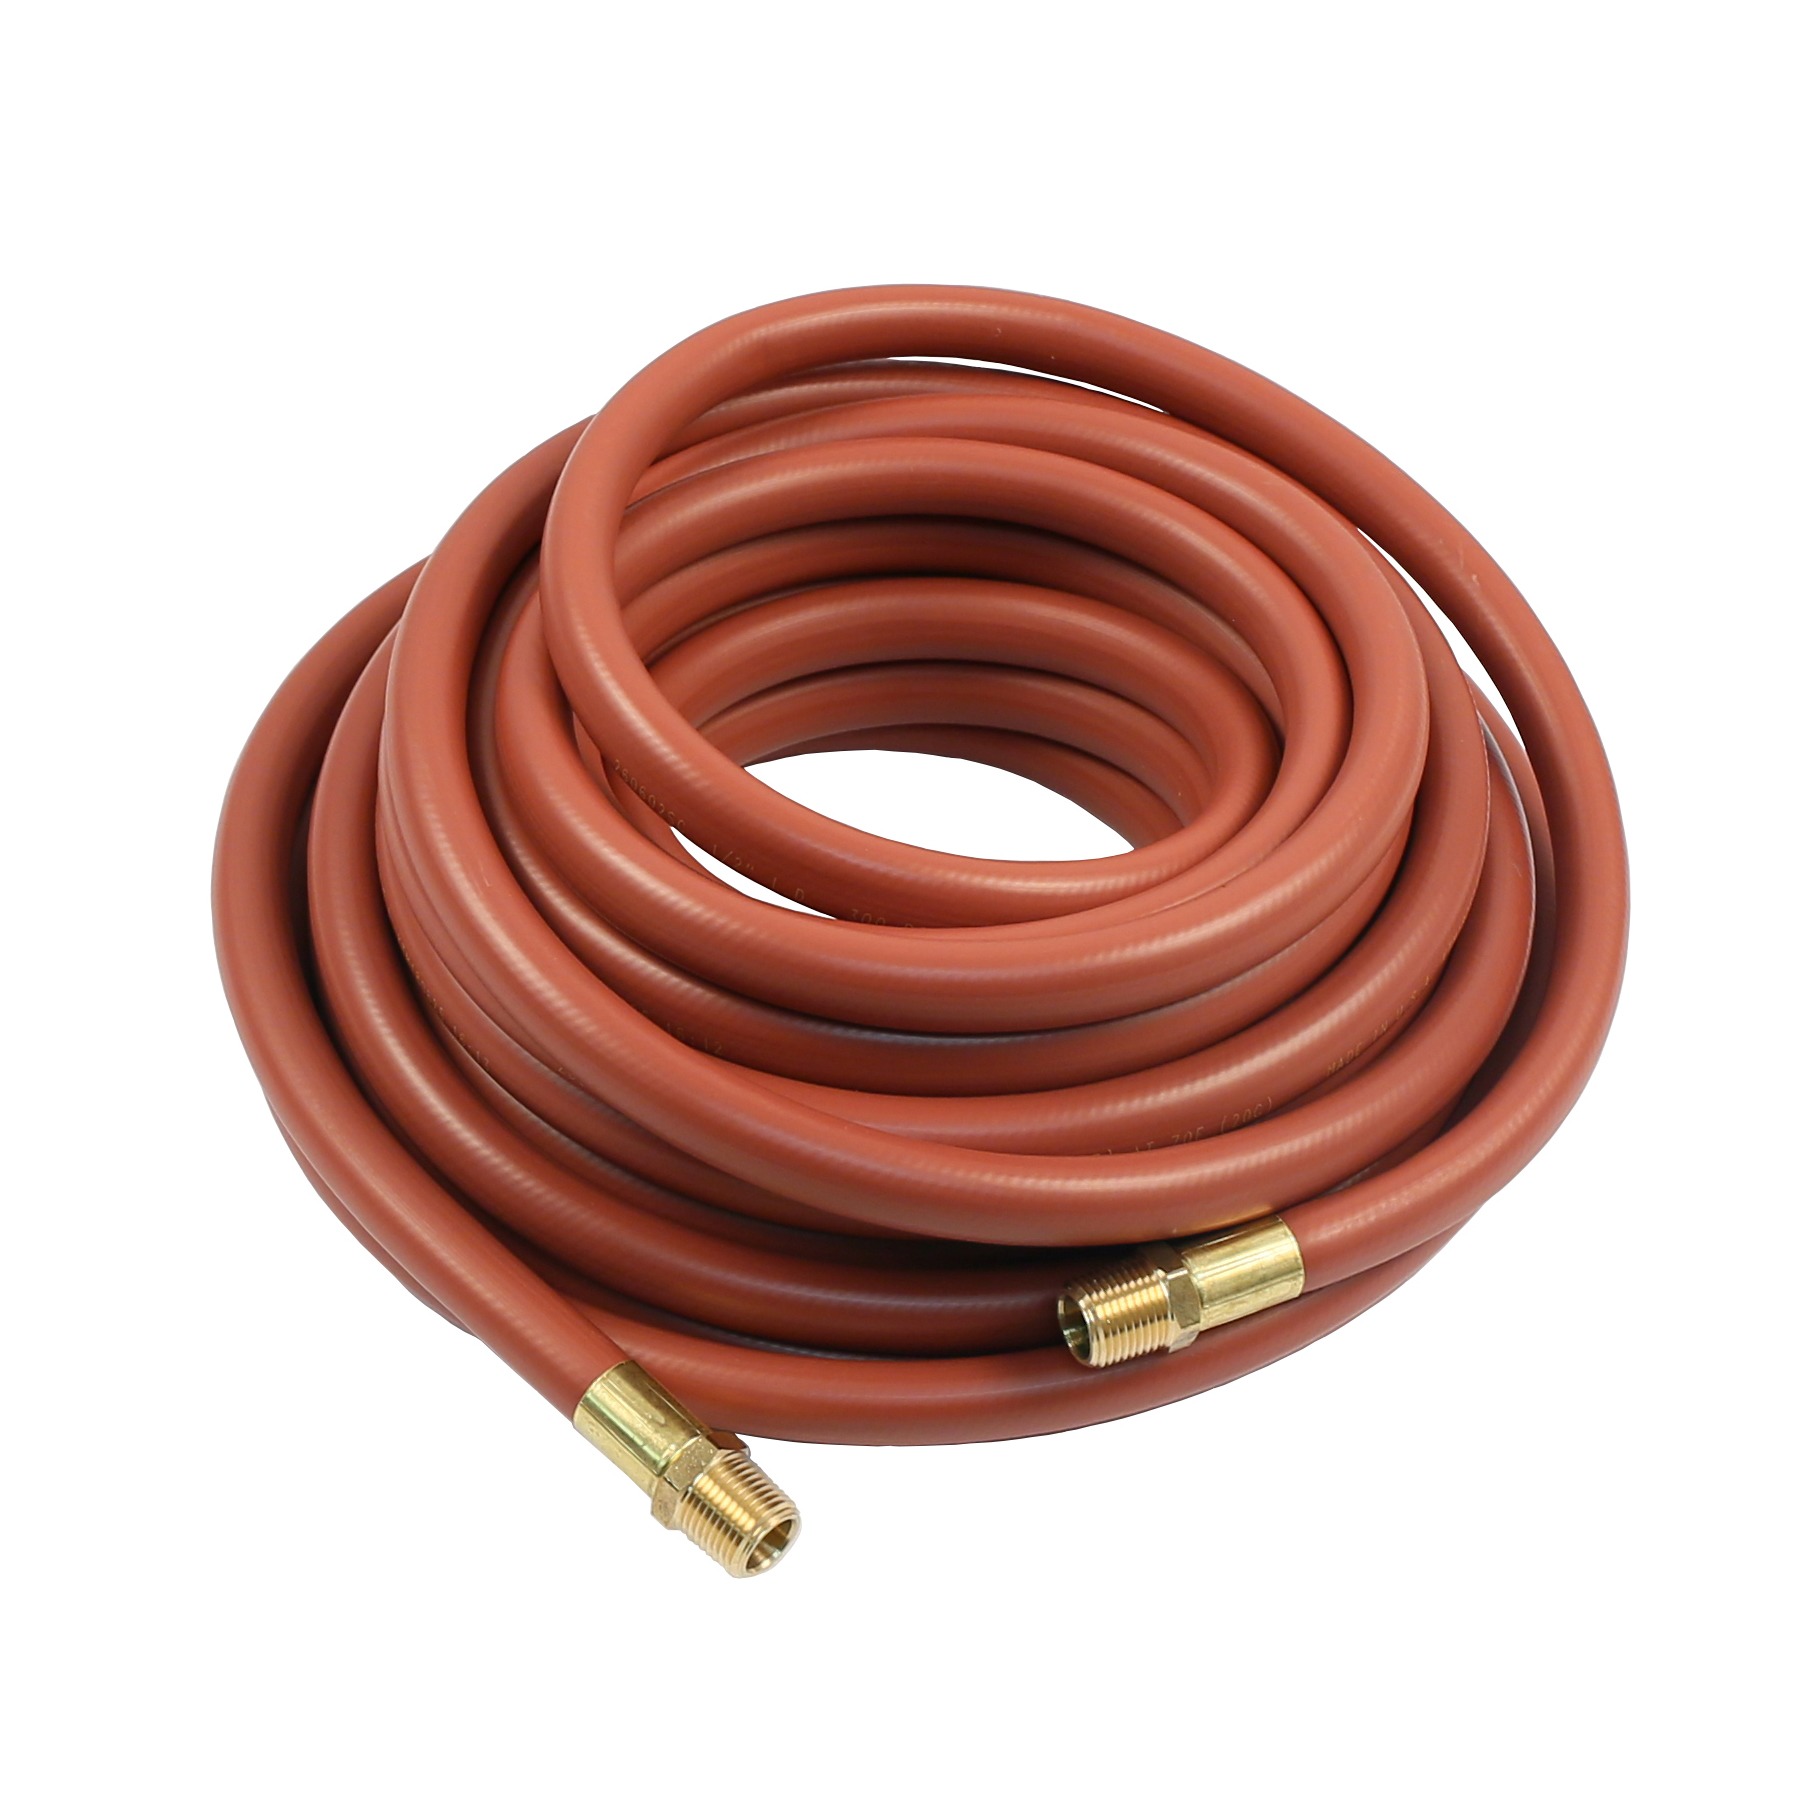 Reelcraft S601022-50 - 1/2 in. x 50 ft. Low Pressure Air/Water Hose